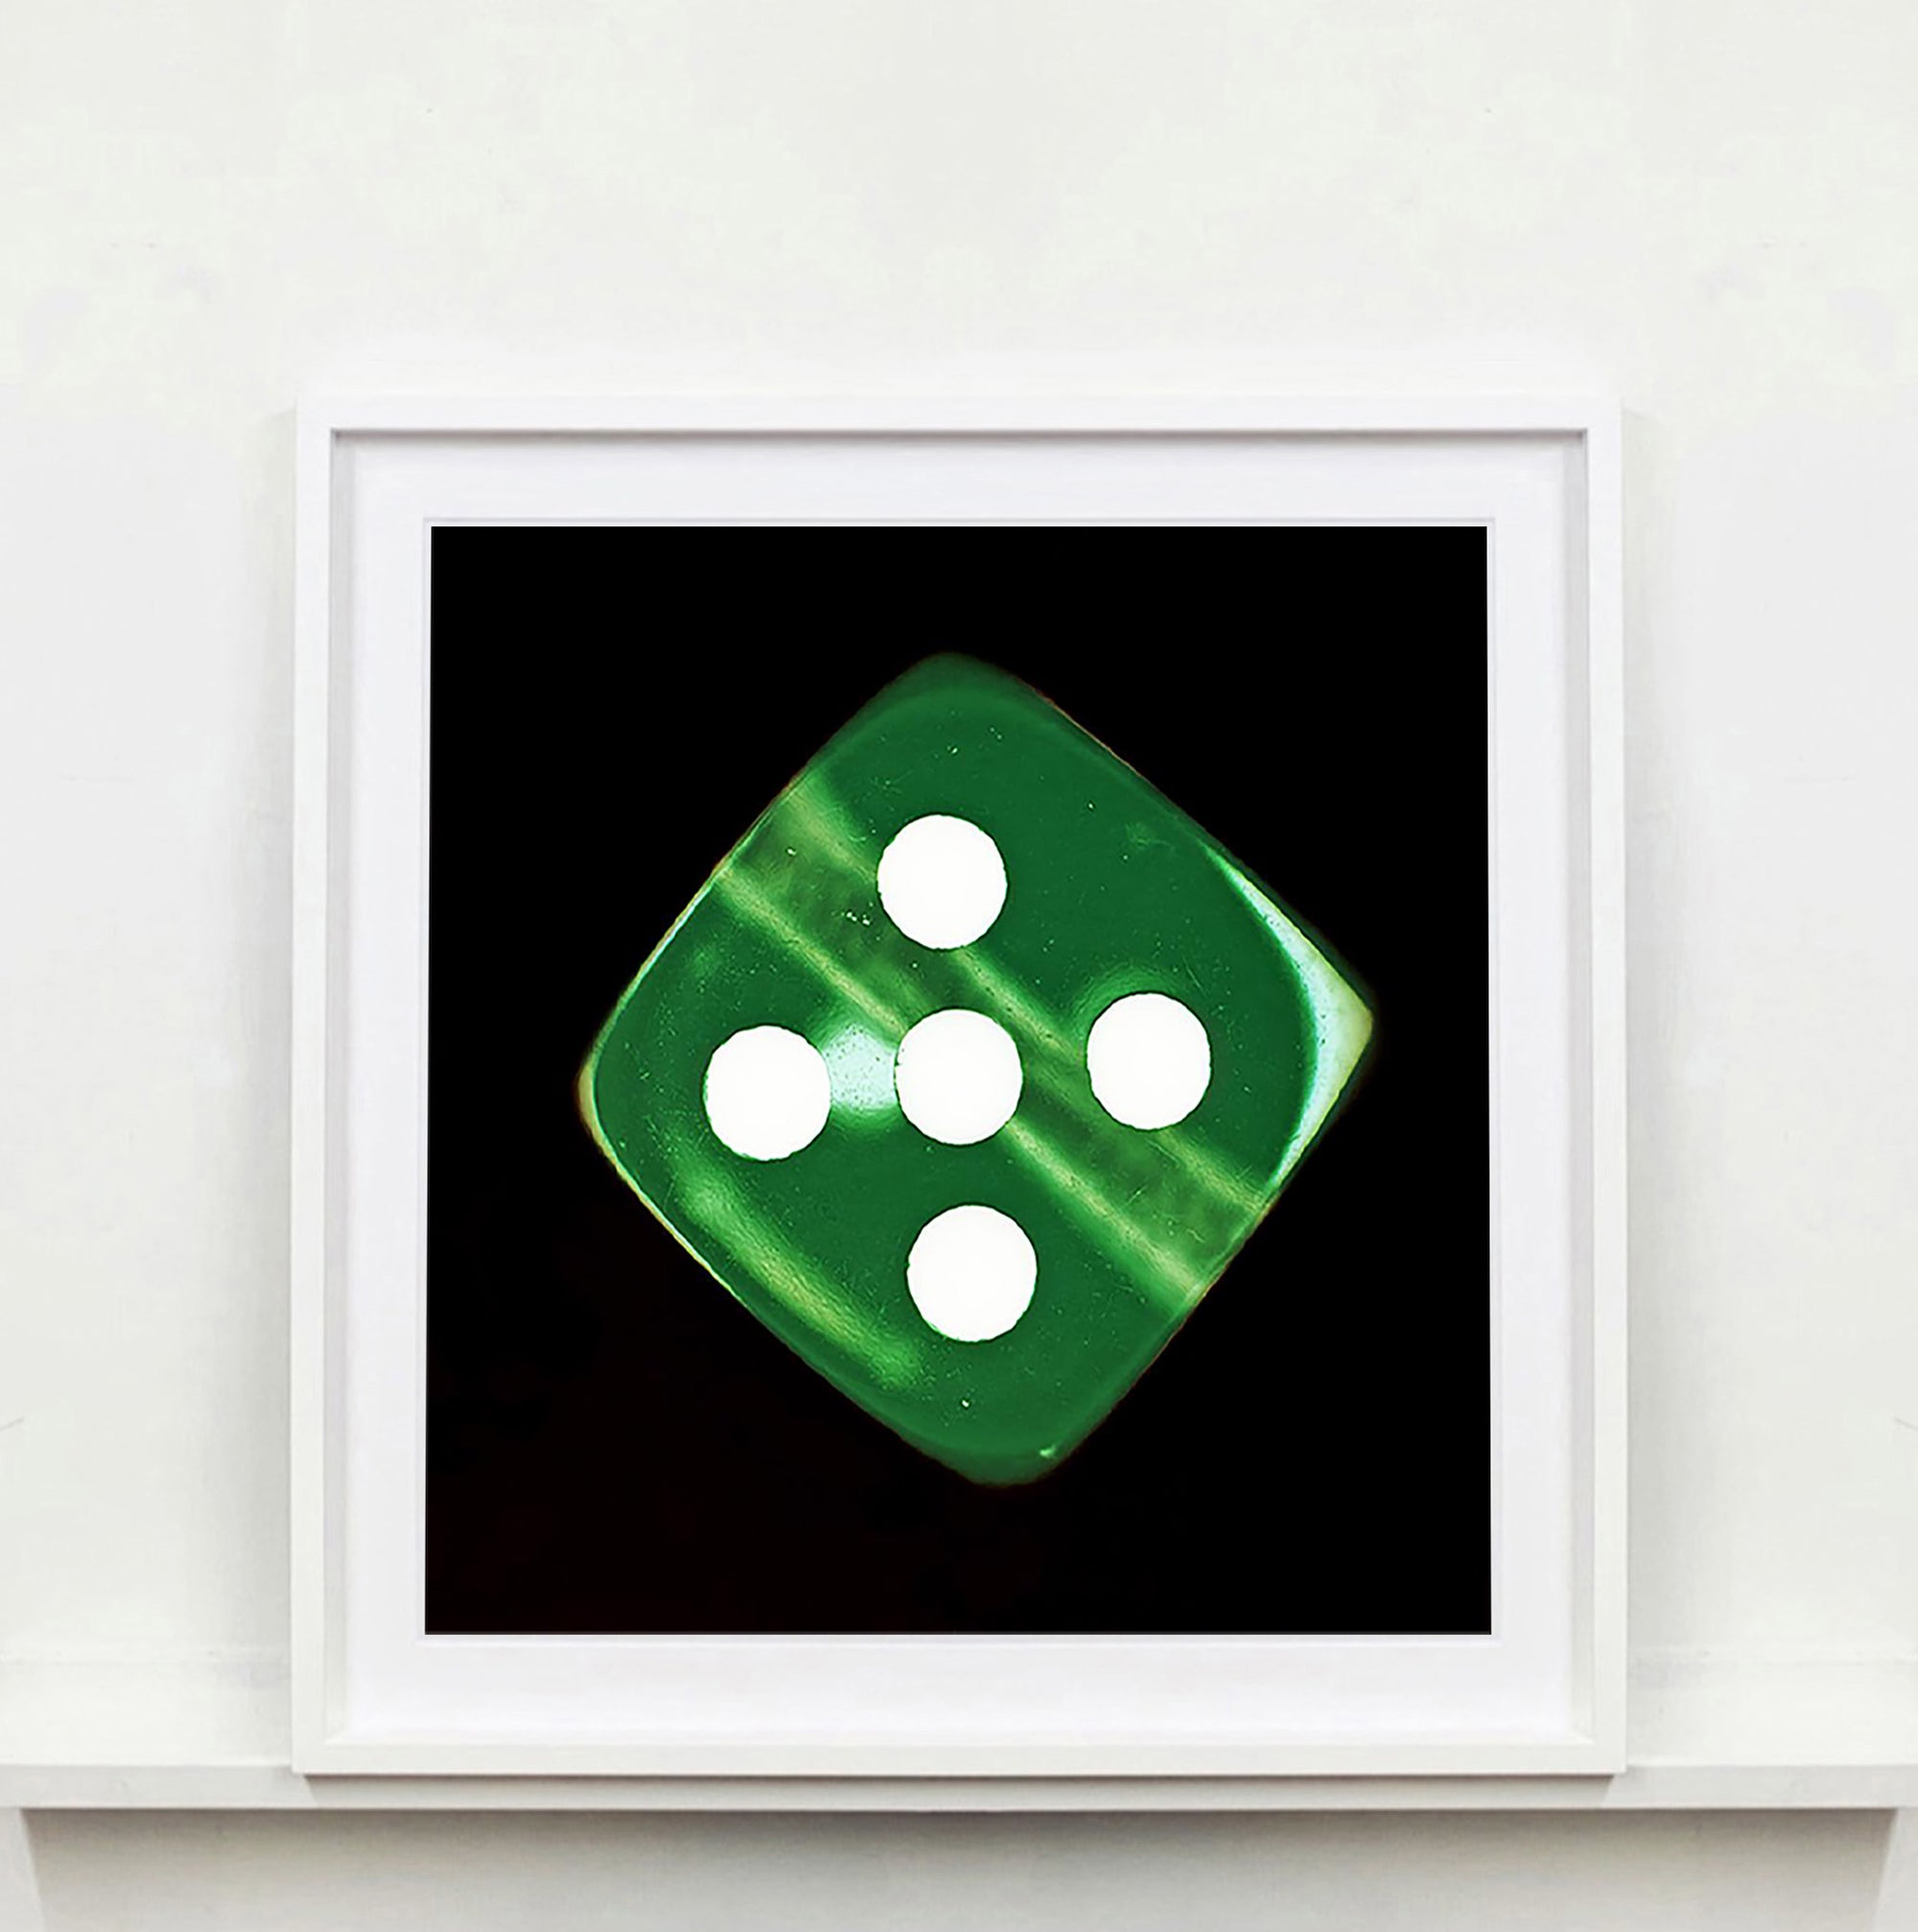 From Heidler & Heeps Dice Series, 'Green Five' is a green dice suspended on a black background, hypnotically curious in both content and technique, viewers find themselves pleasantly puzzled. Heidler & Heeps have developed their own dichromatic technique resulting in something, which is neither a straightforward photograph, nor photogram. 